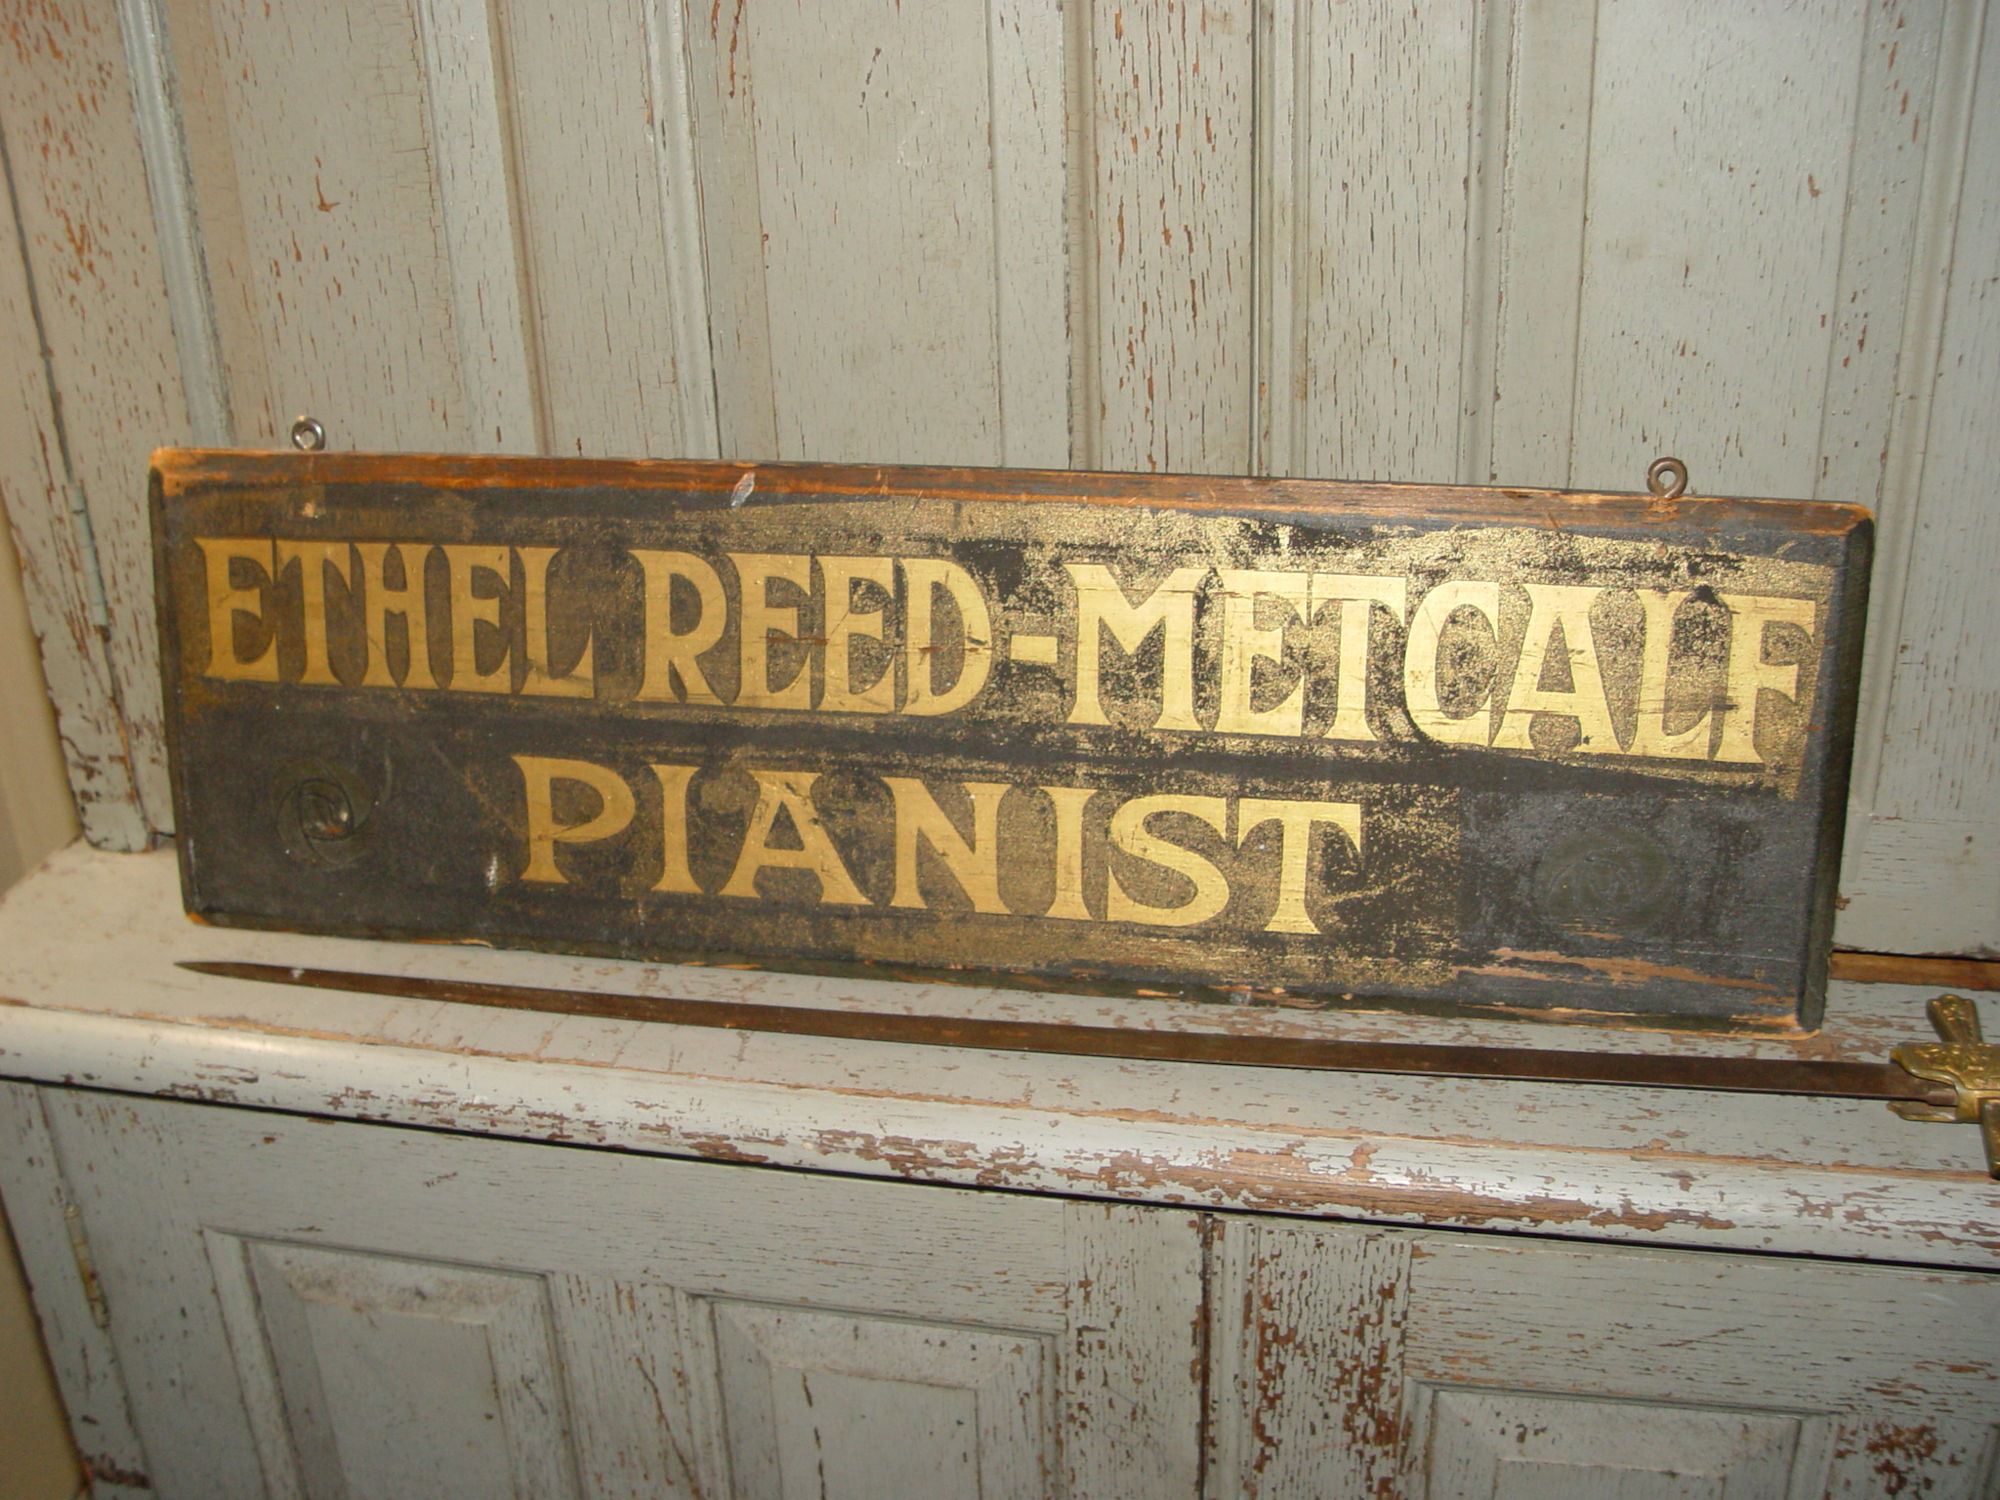 19th c. Ethel
                        Reed - Metcalf Pianist Minneapolis 2 sided
                        hand-painted wood American trade sign, gold
                        leaf